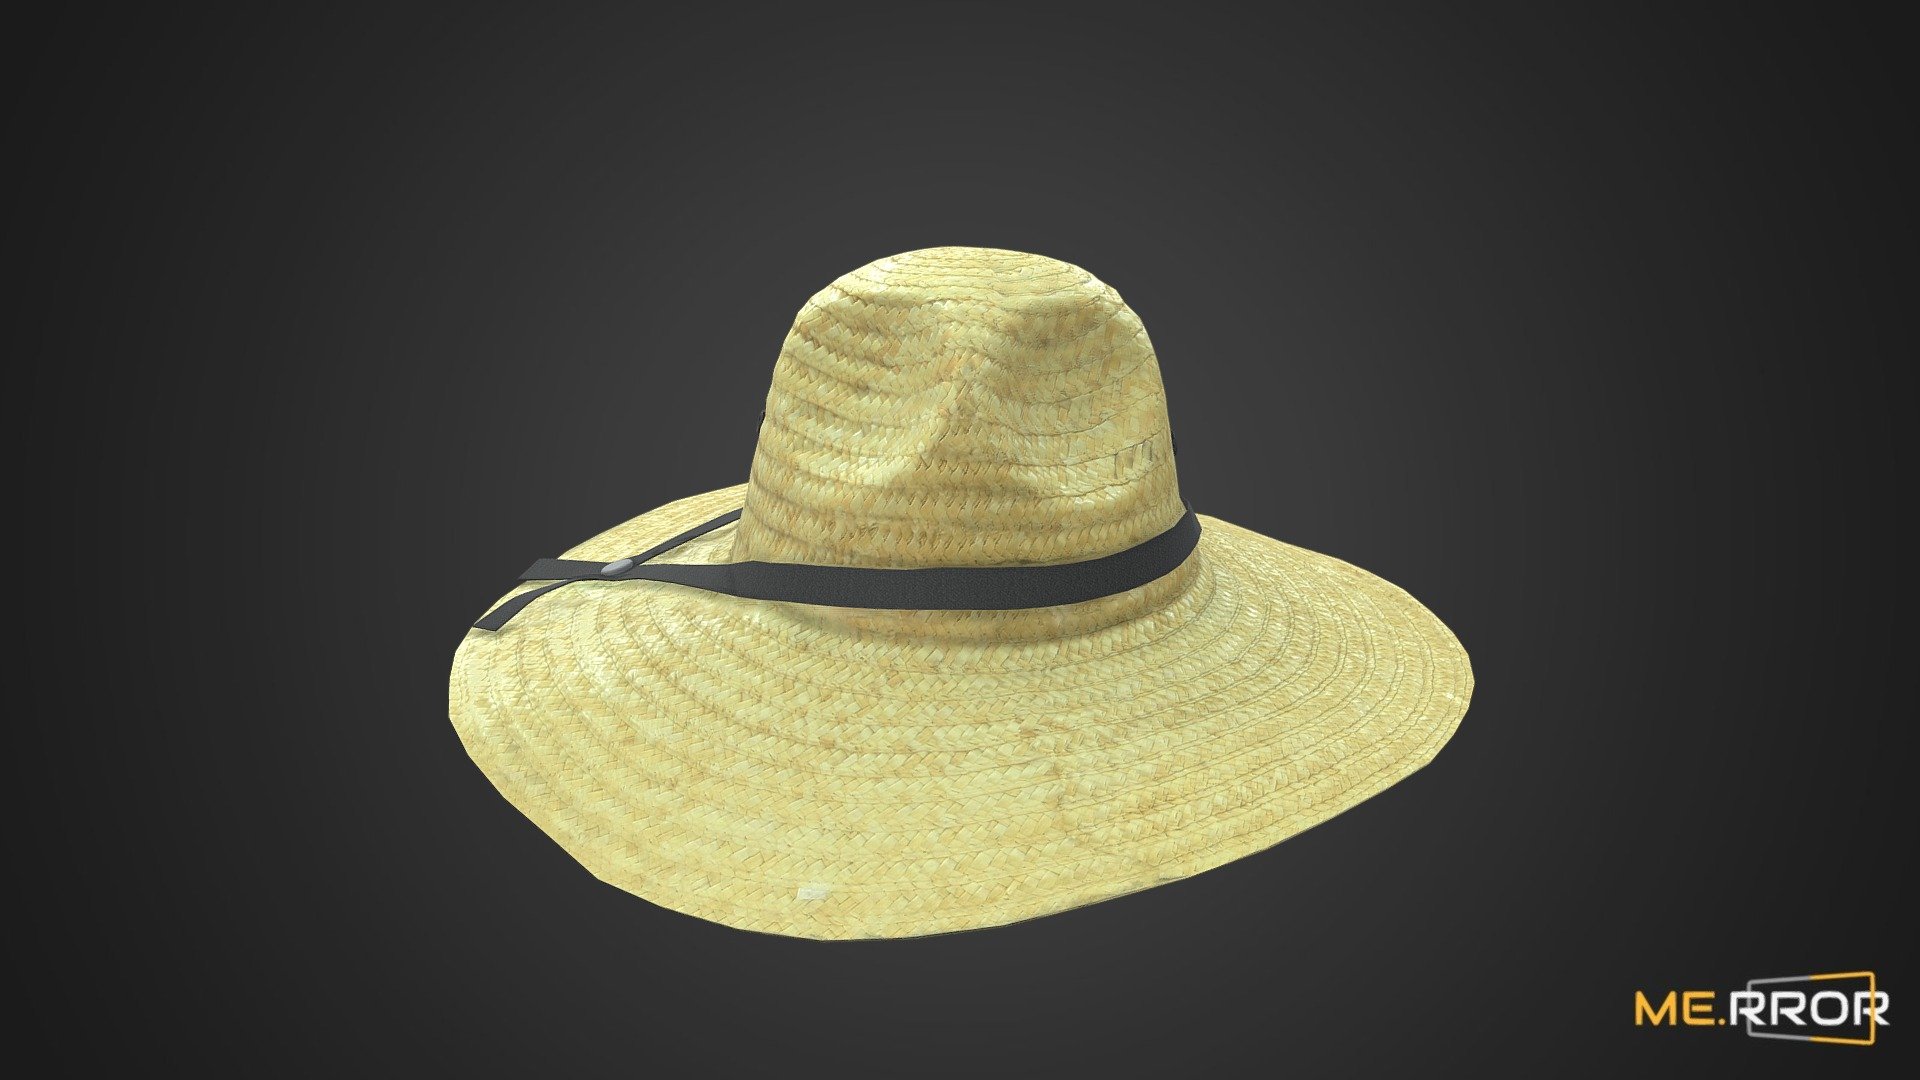 MERROR is a 3D Content PLATFORM which introduces various Asian assets to the 3D world

#3DScanning #Photogrametry #ME.RROR - [Game-Ready] Summer Straw Hat - Buy Royalty Free 3D model by ME.RROR Studio (@merror) 3d model